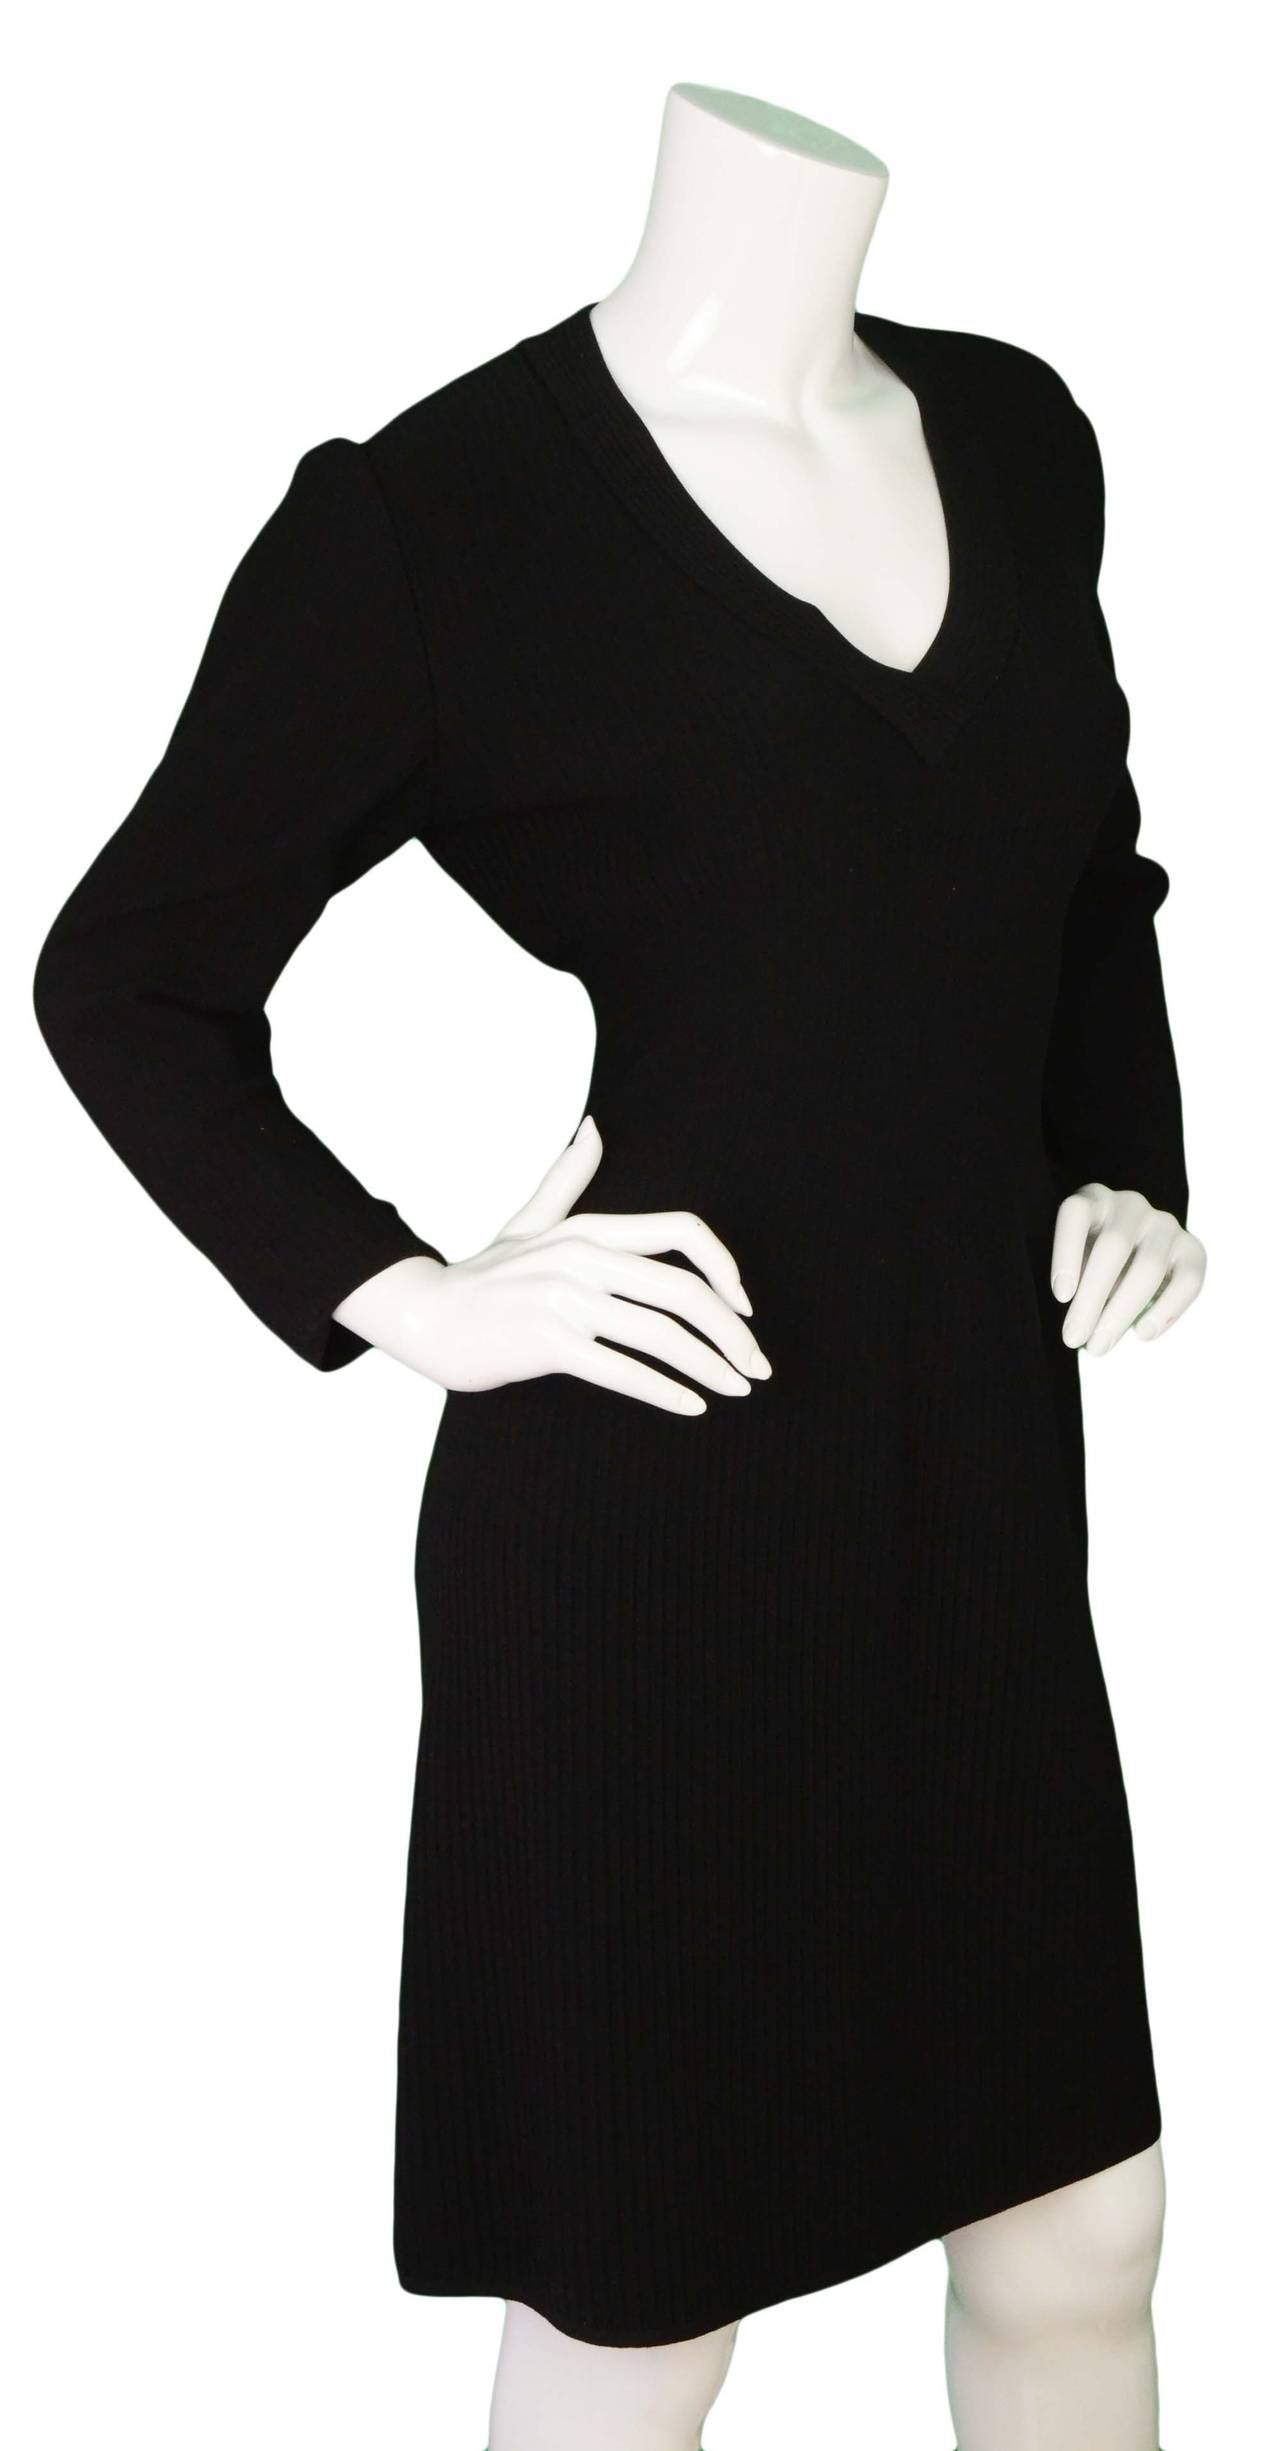 Alaïa Black Ribbed Wool 3/4 Sleeve V-Neck Dress
Features elastic waistline
Made in: Italy
Color: Black
Composition: 72% Wool, 22% polyamide, 6% elastodiene
Lining: None
Closure/opening: Back center zipper
Exterior Pockets: None
Interior